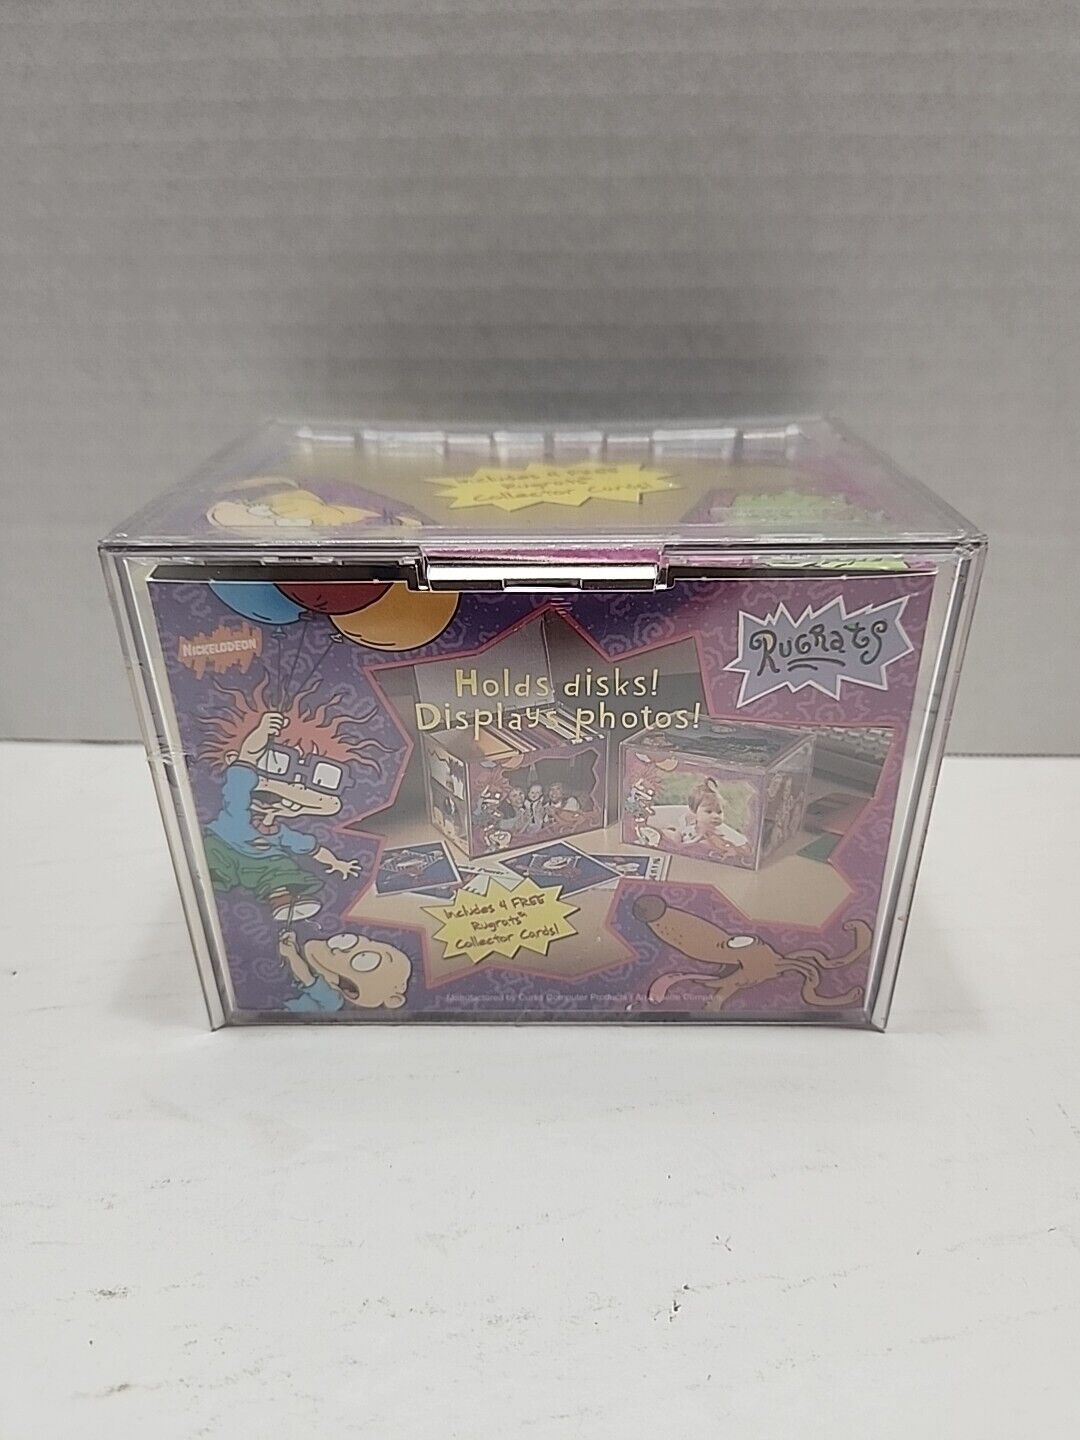 1997 Nickelodeon Rugrats photo cube 4 free collector cards holds disks